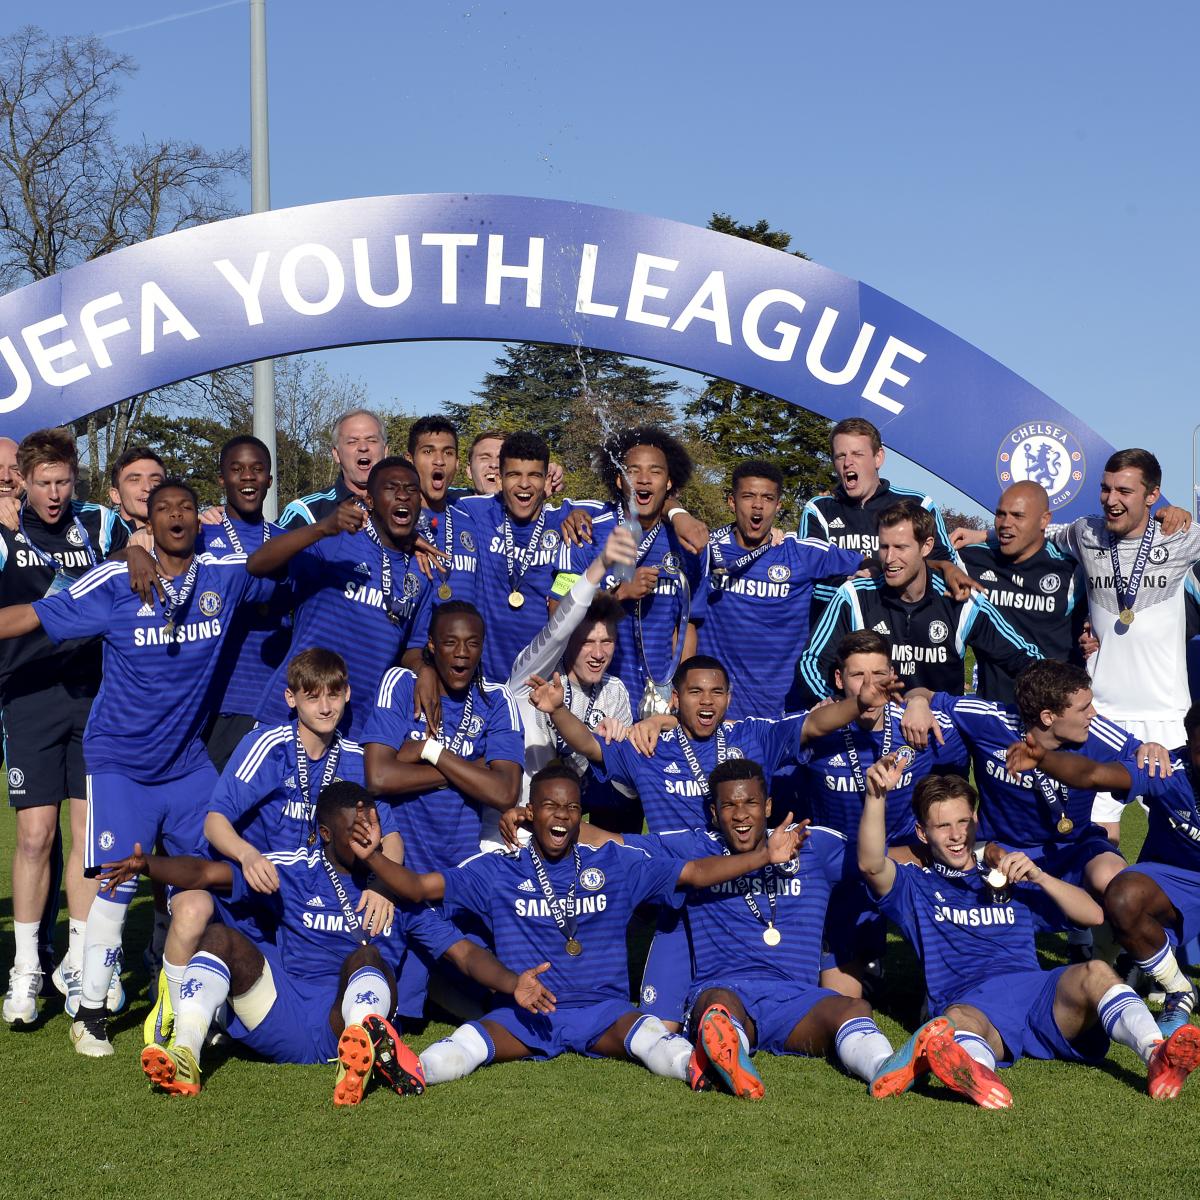 Uefa Youth League 15 Results Wednesday Scores Standings Next Fixtures Bleacher Report Latest News Videos And Highlights